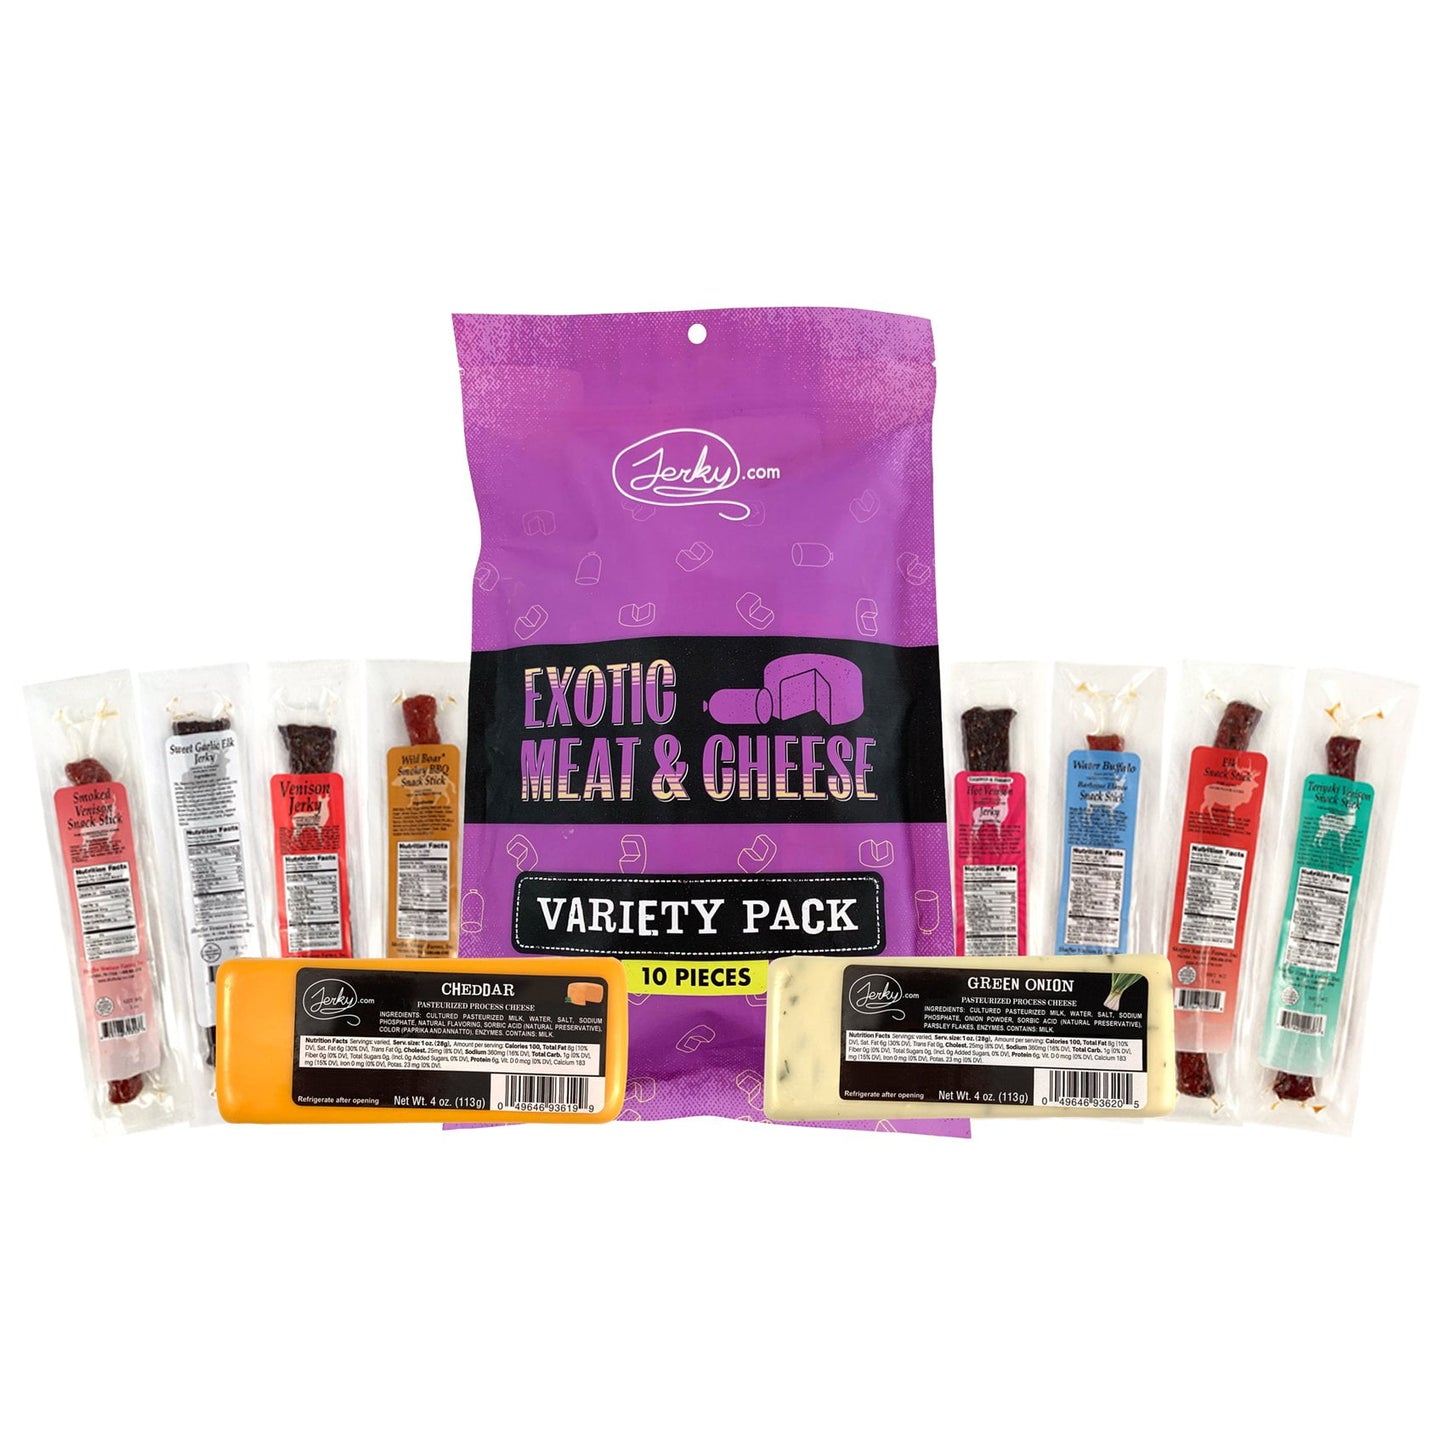 Exotic Meat & Cheese Variety Pack - 10 Pieces by Jerky.com